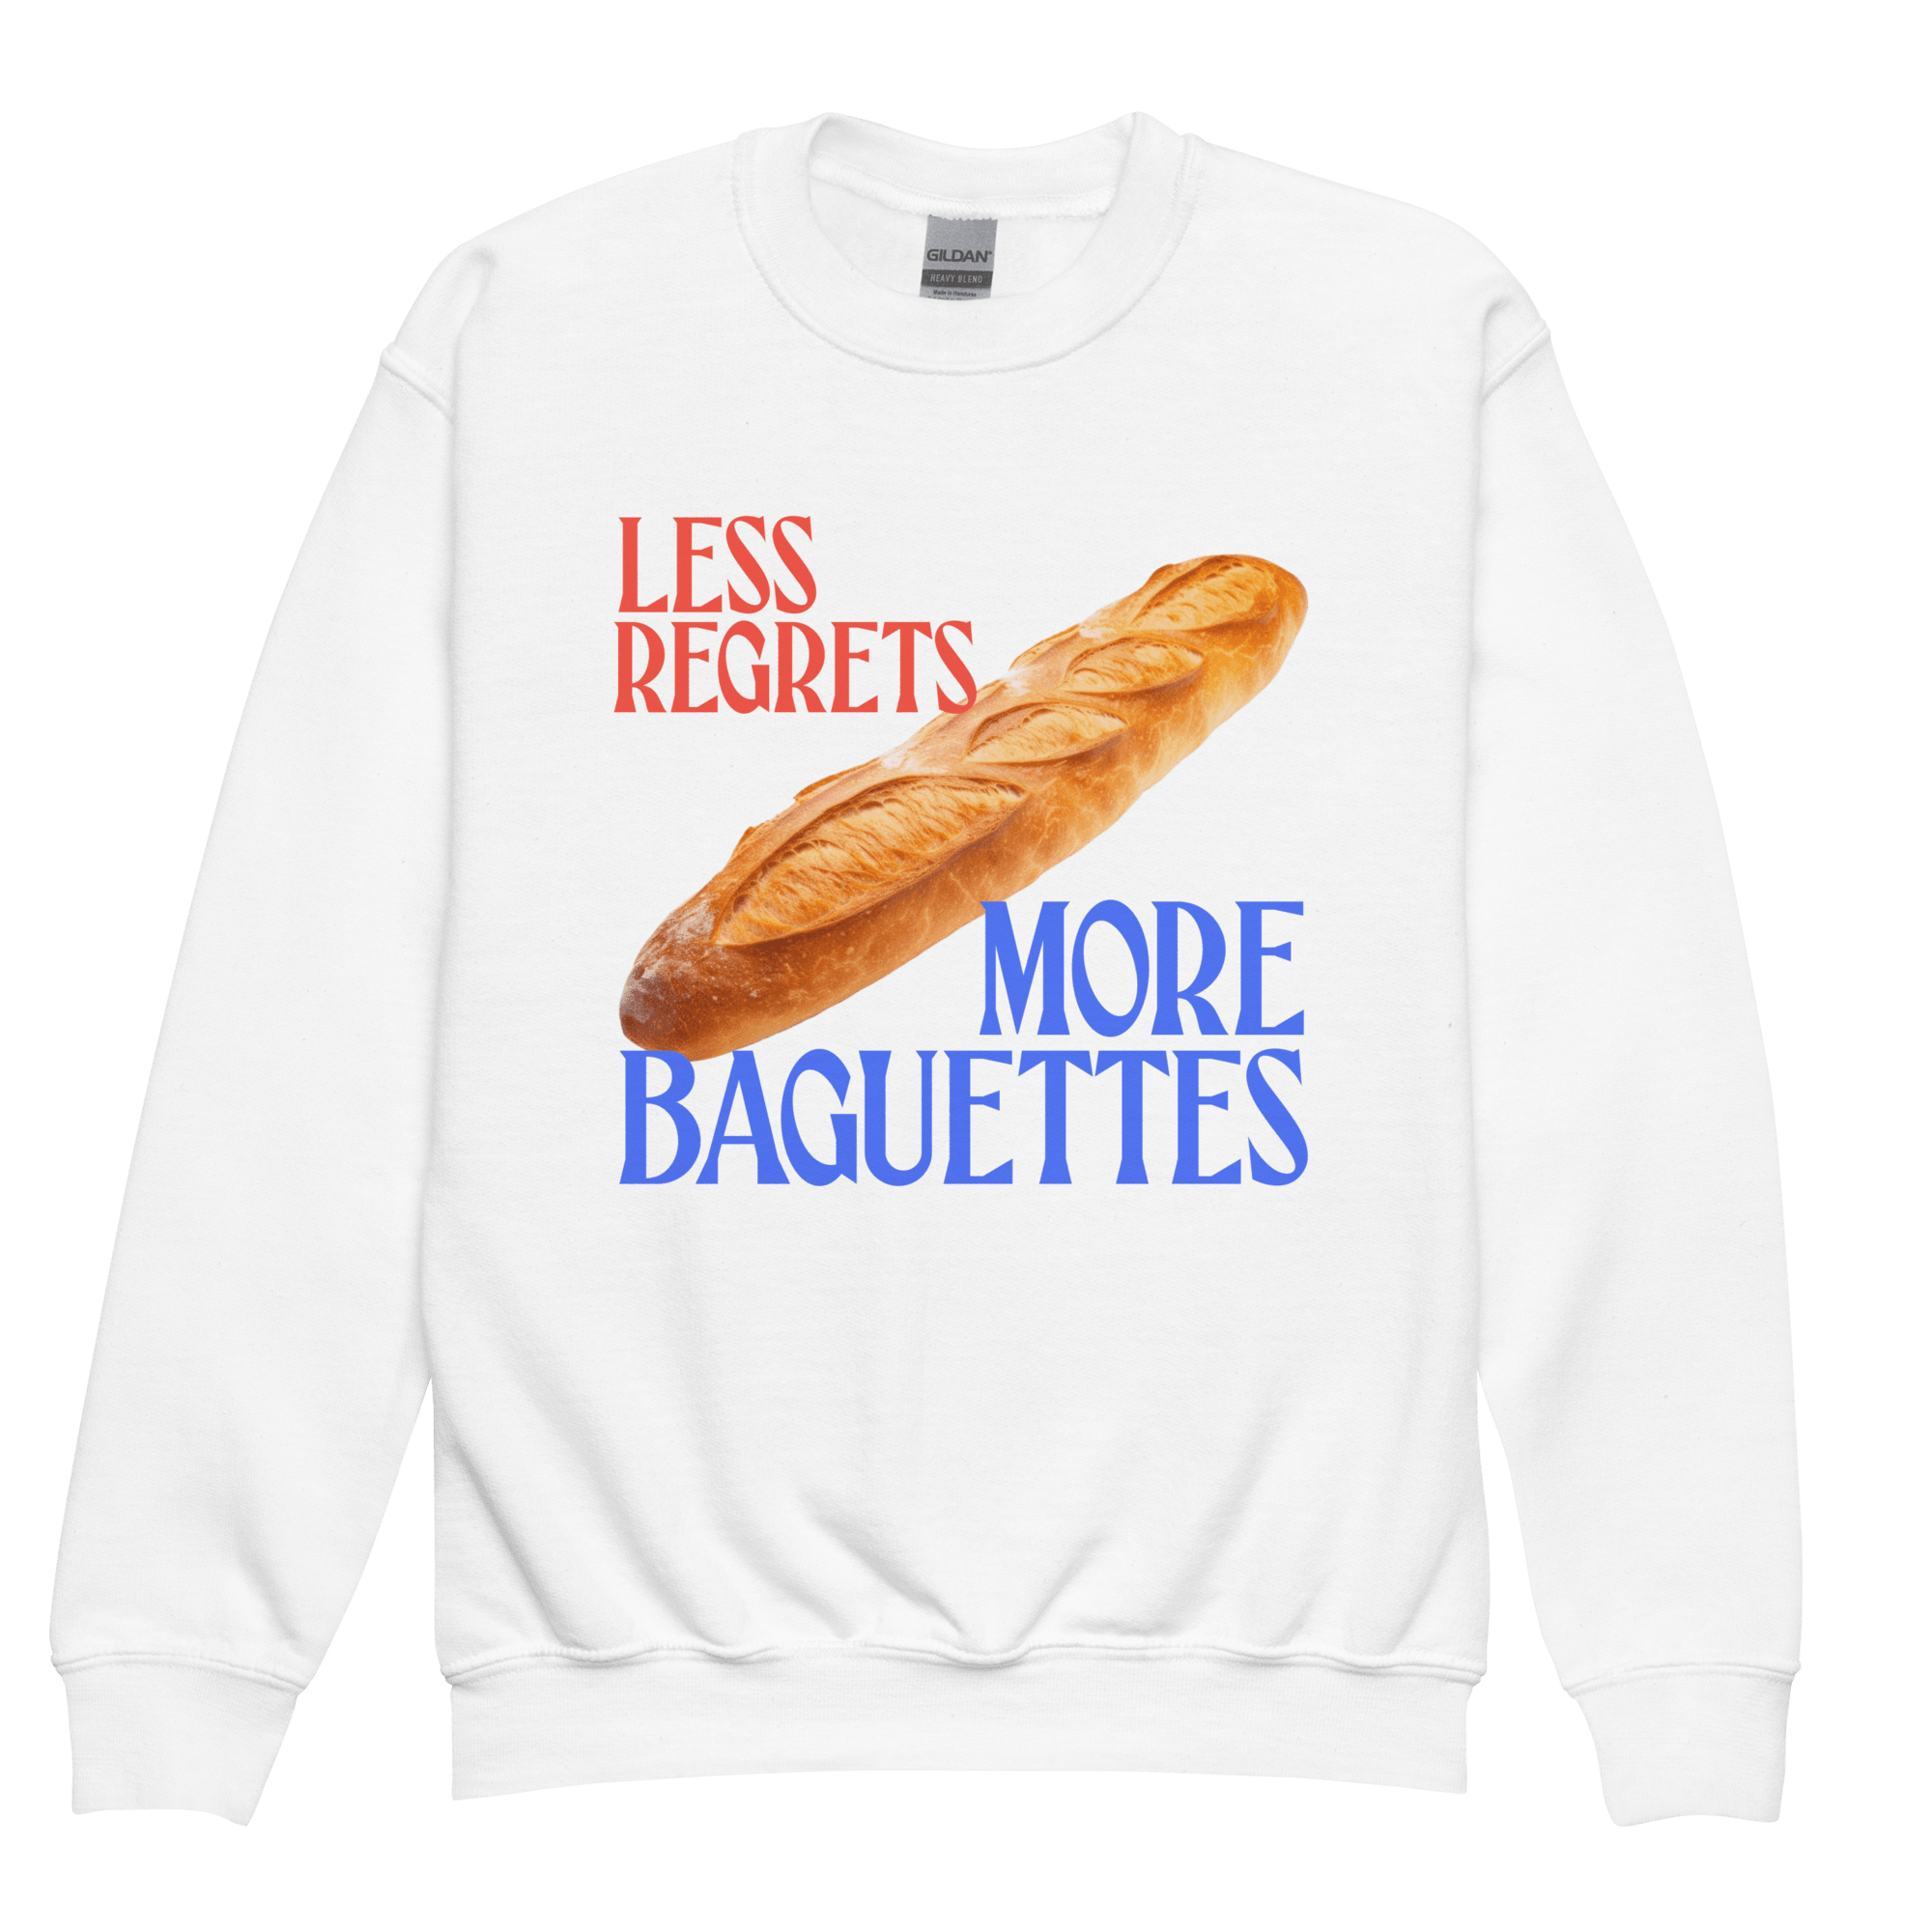 Less Regrets More Baguettes Youth Kids Sweatshirt - Polychrome Goods 🍊